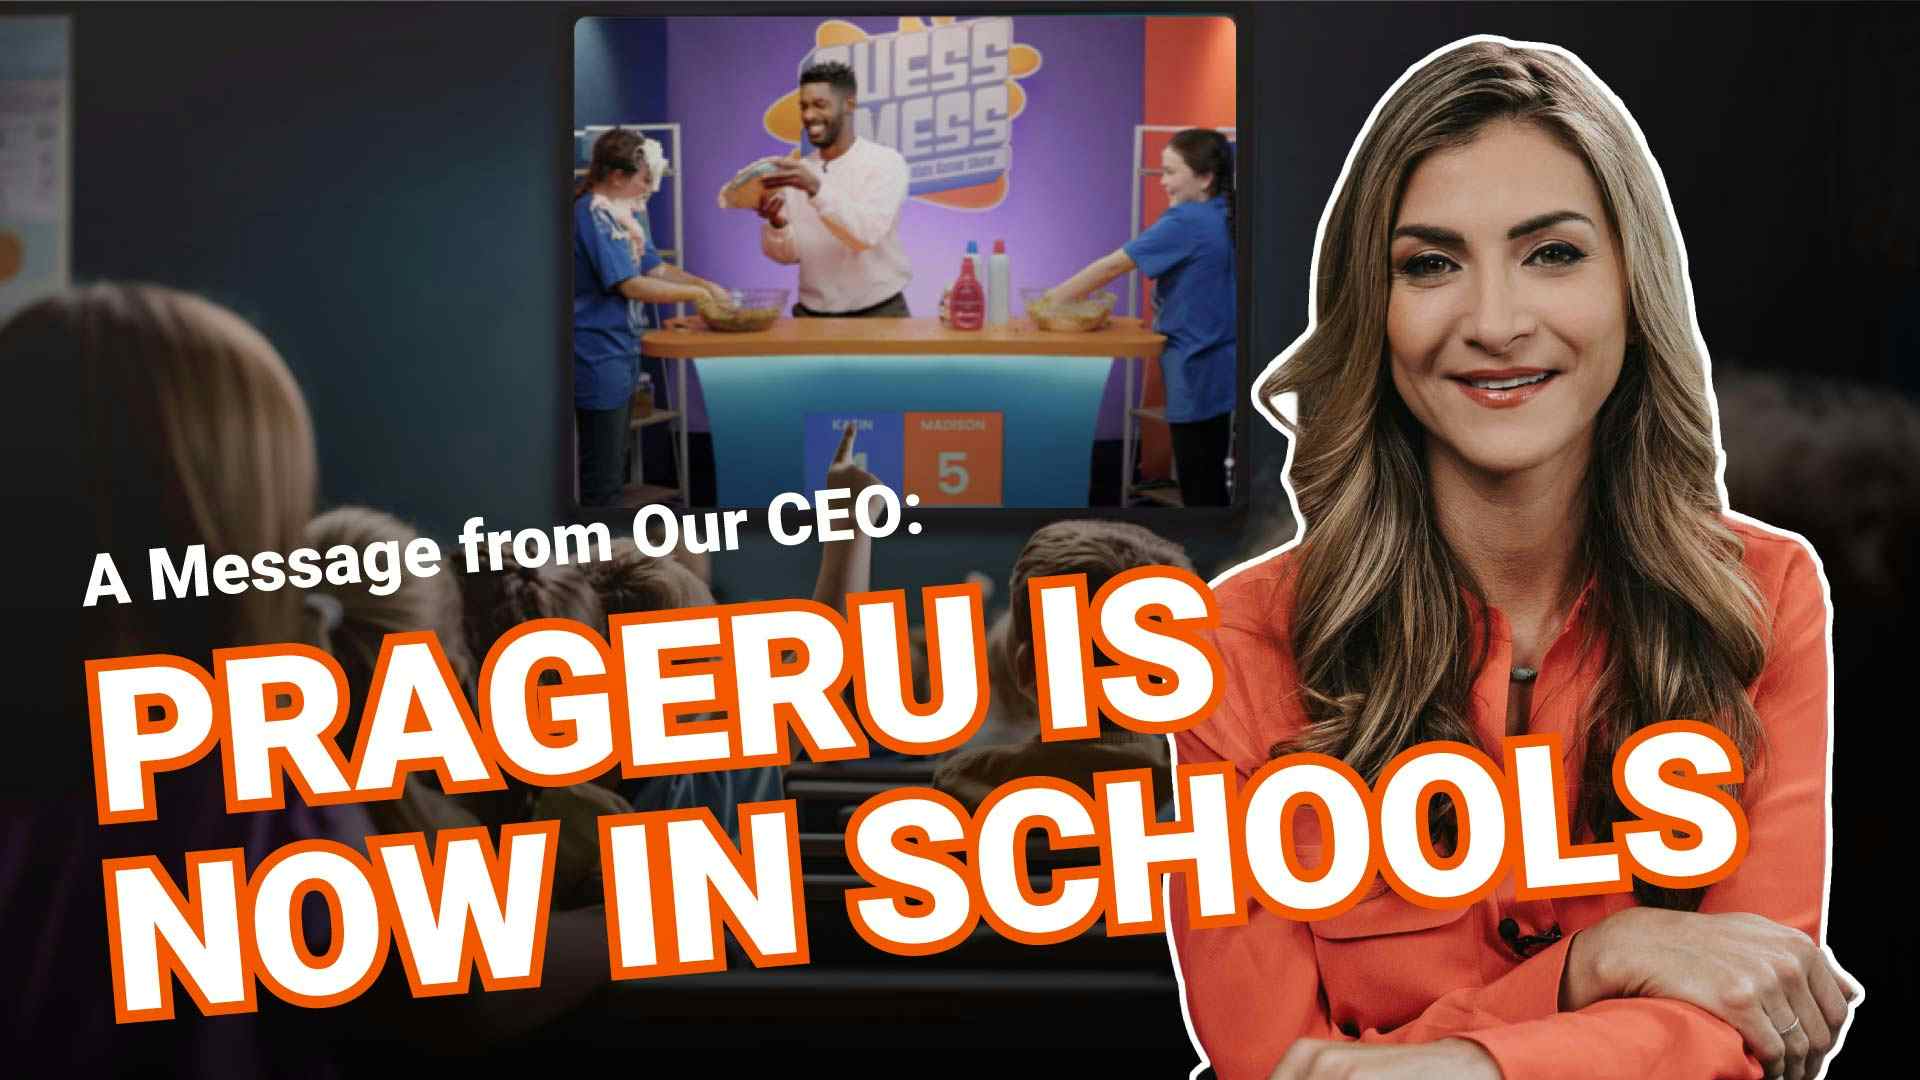 A Message from Our CEO: PragerU Is Now in Schools